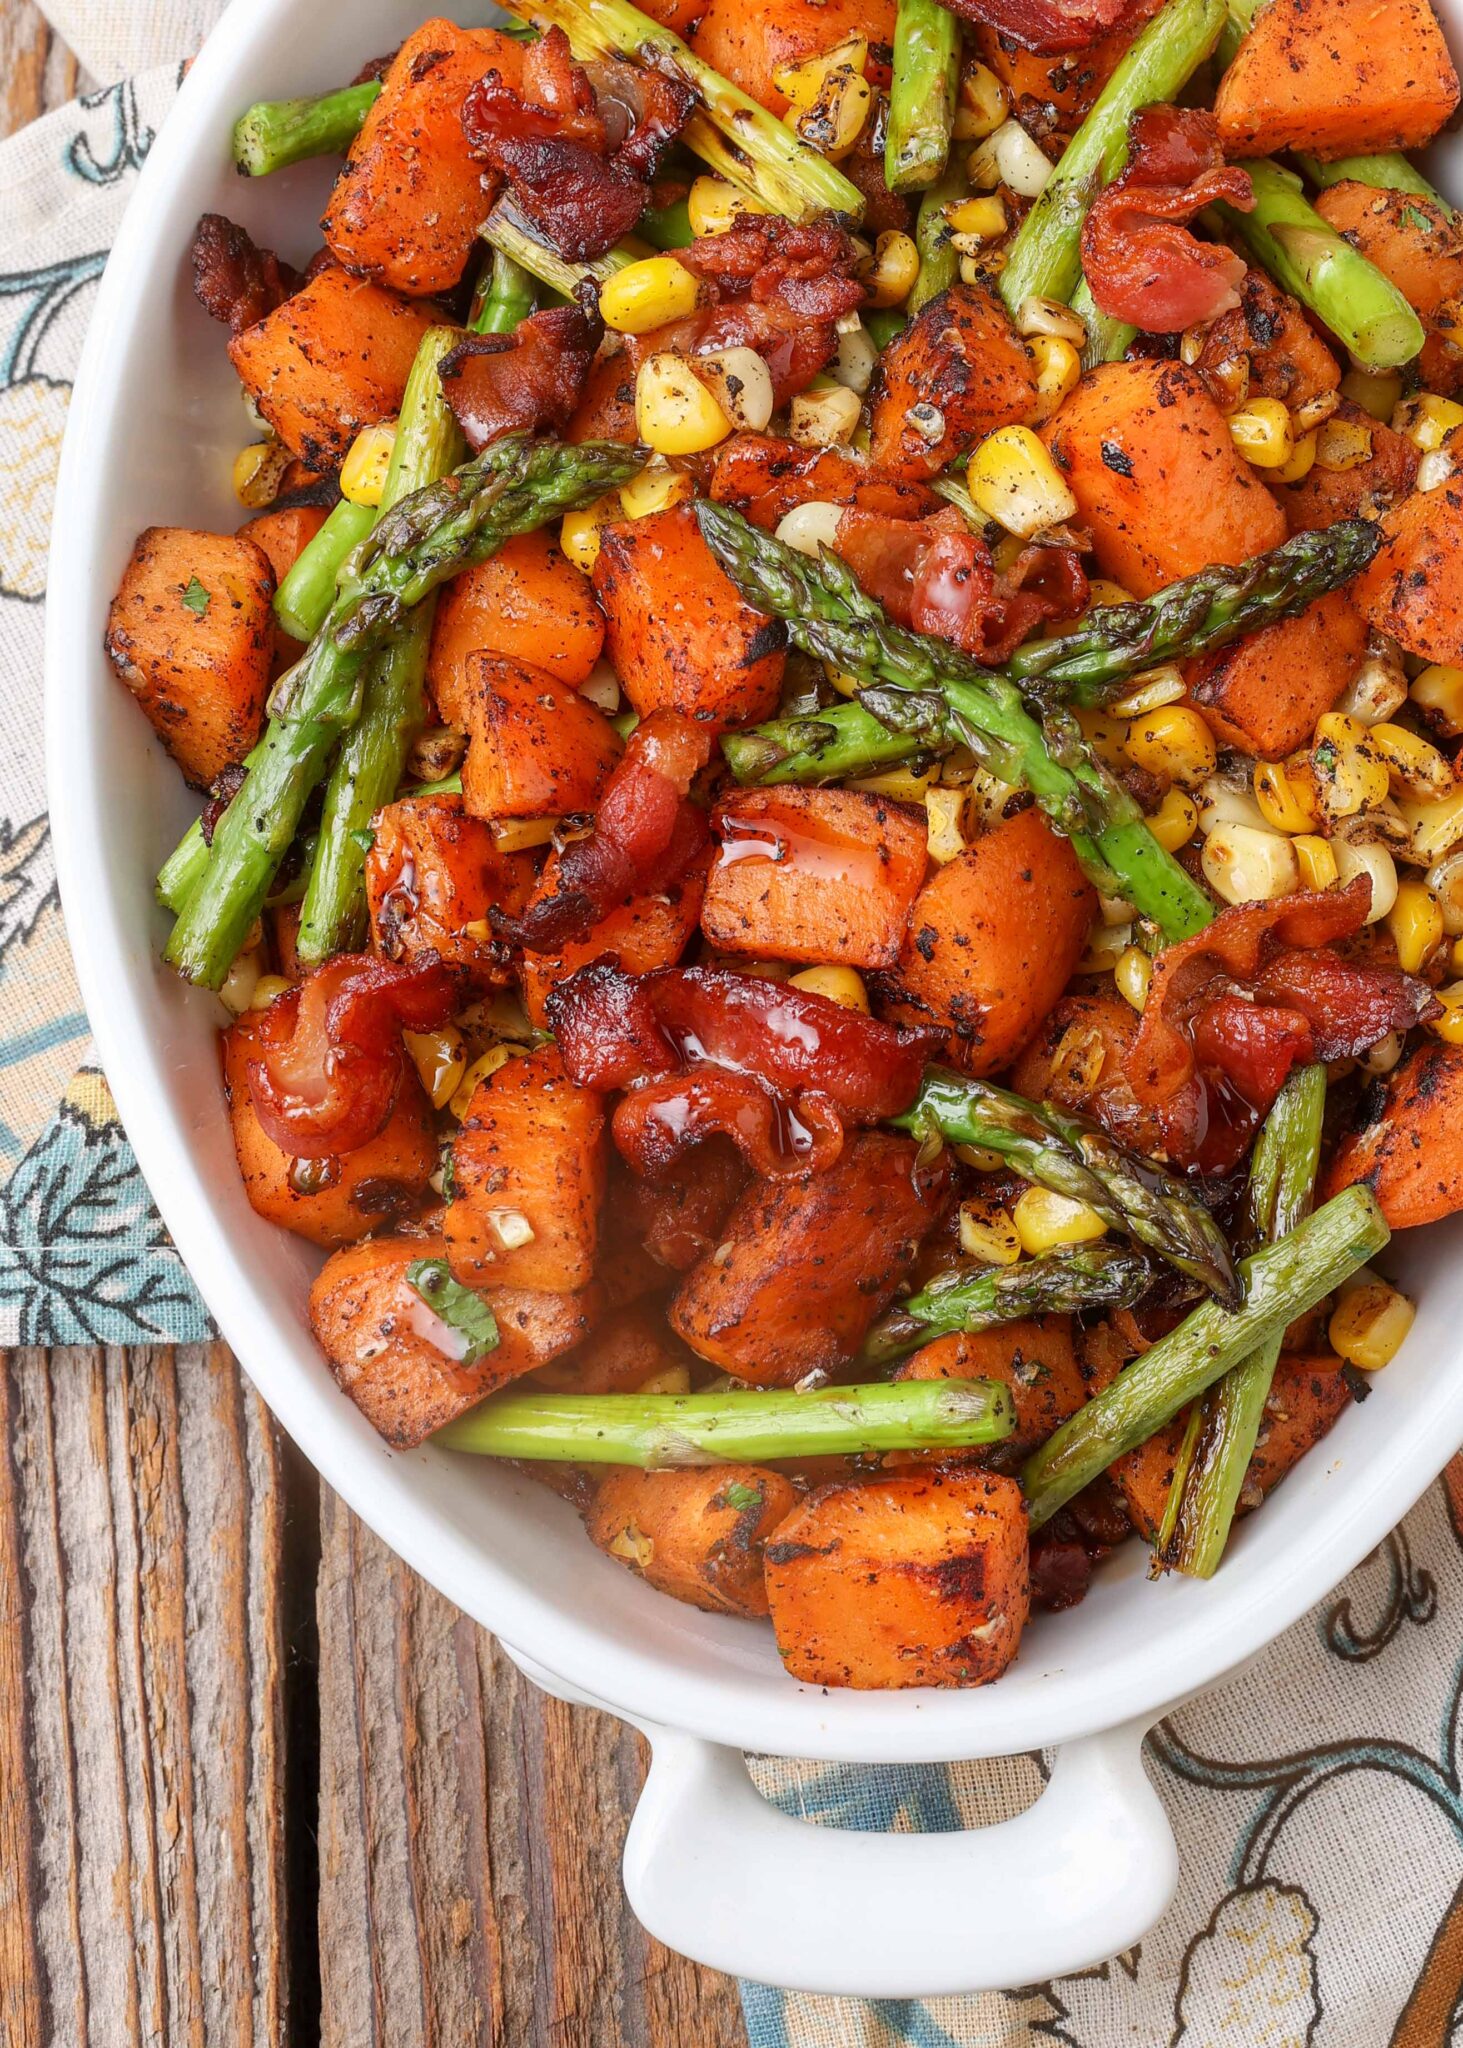 sweet potatoes, asparagus, corn, and bacon in oven white dish